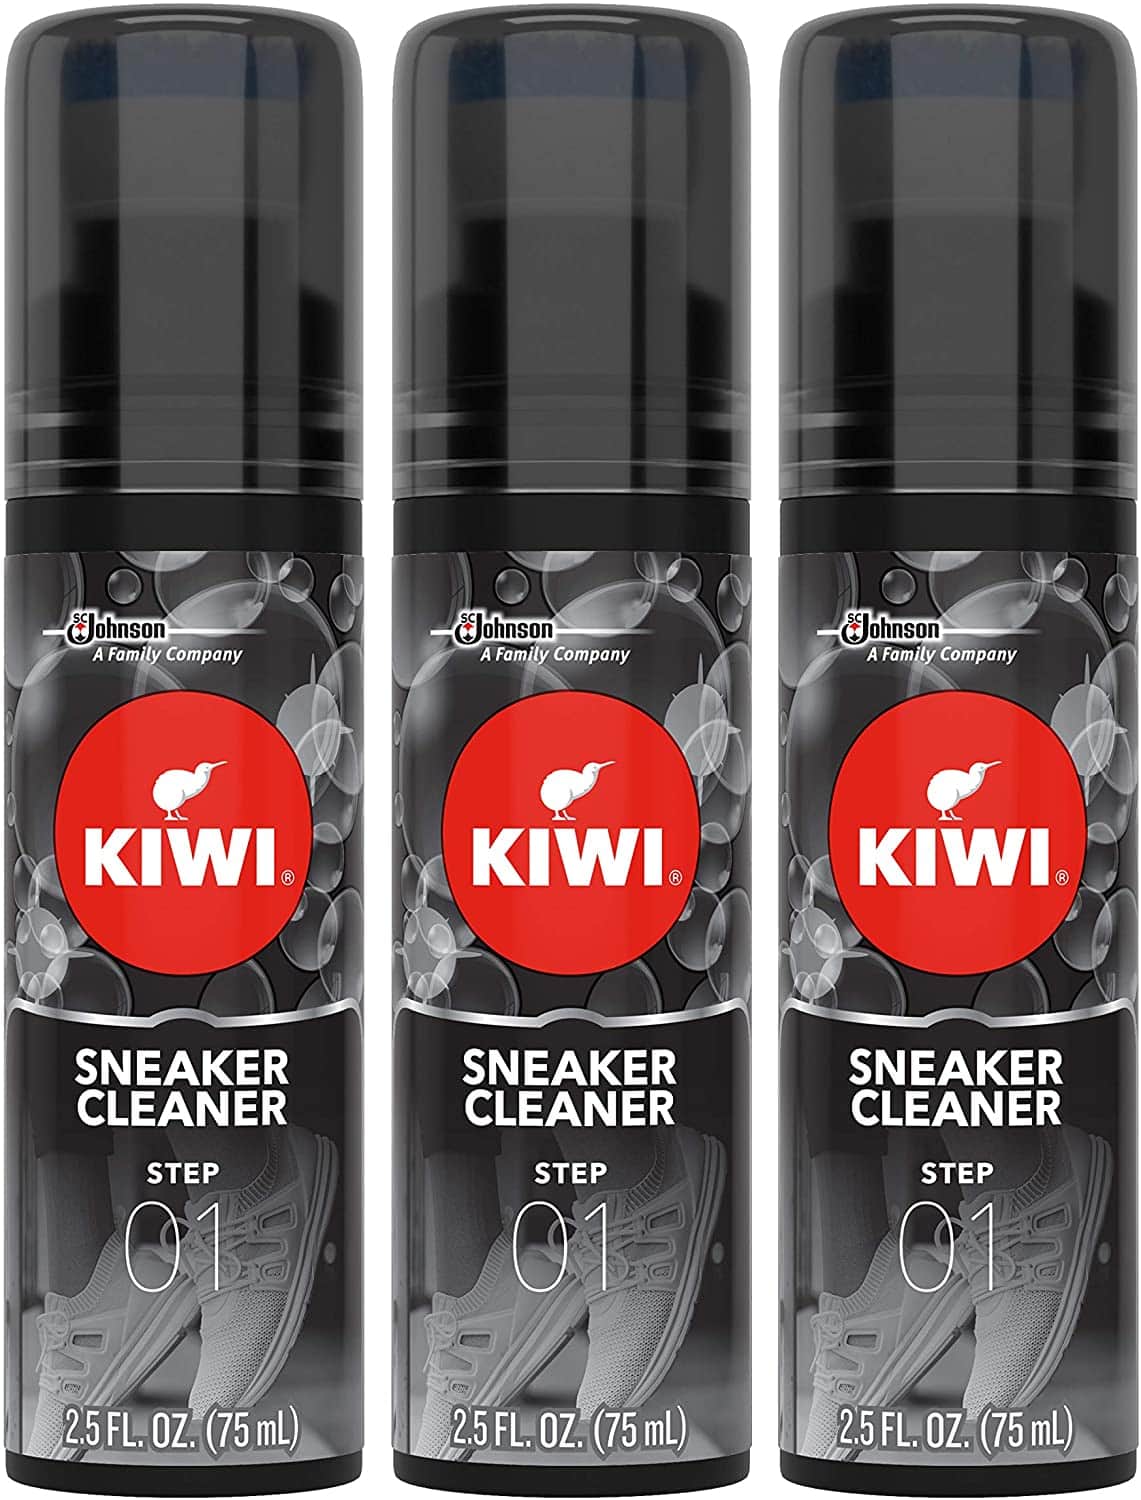 Extend the life of your shoes with KIWI's Sneaker Cleaner, which is perfect for removing marks, dirt, salt and stains